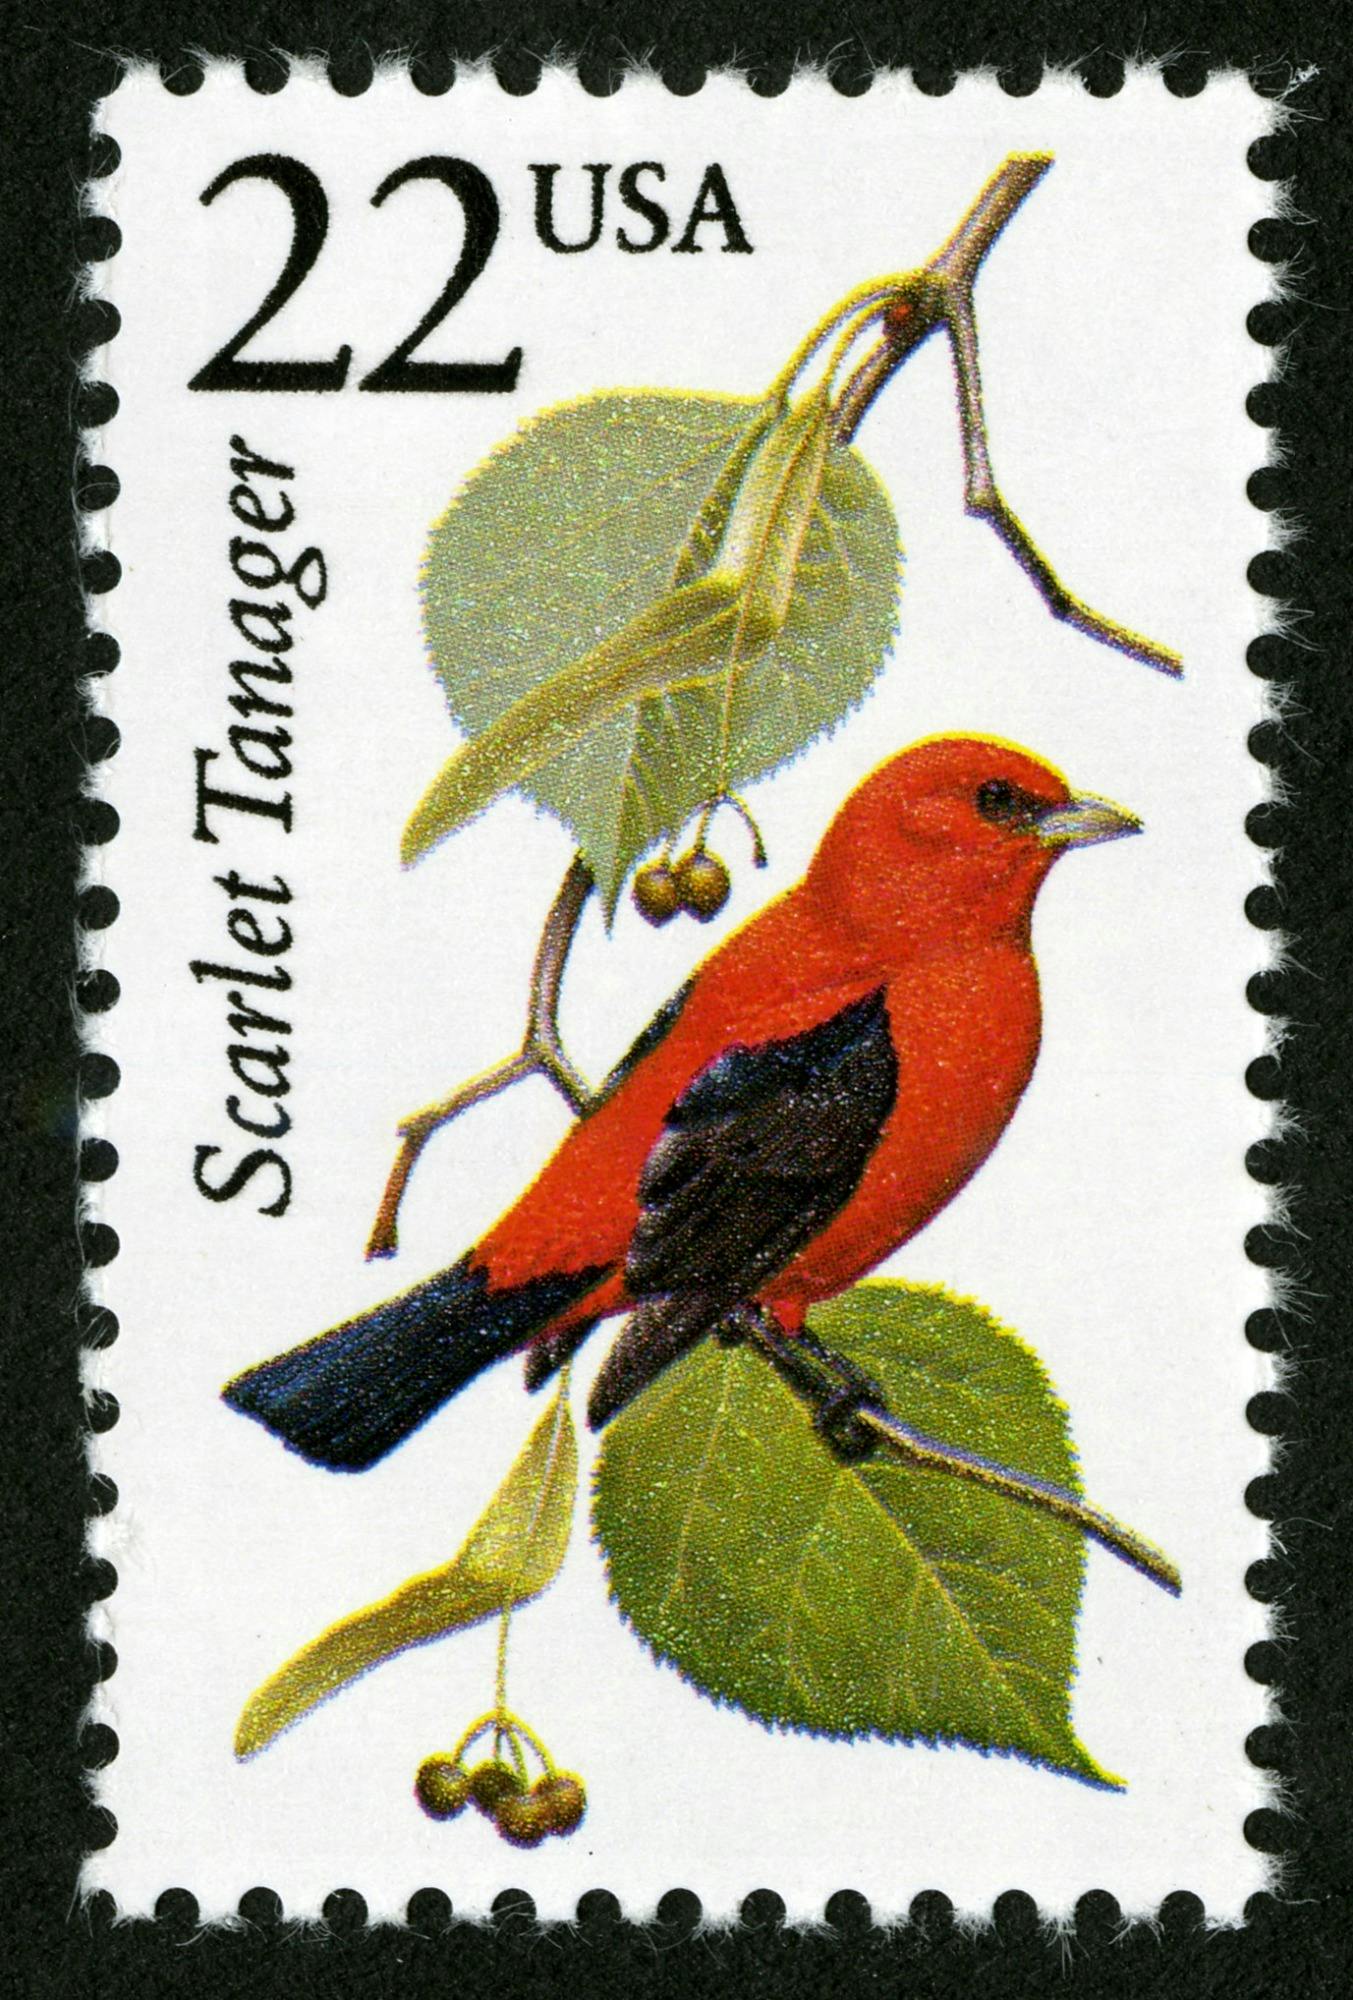 postage stamp showing a red bird with black wings and tail perched on a branch with leaves and berries. Text reads: "22 USA Scarlet Tanger"